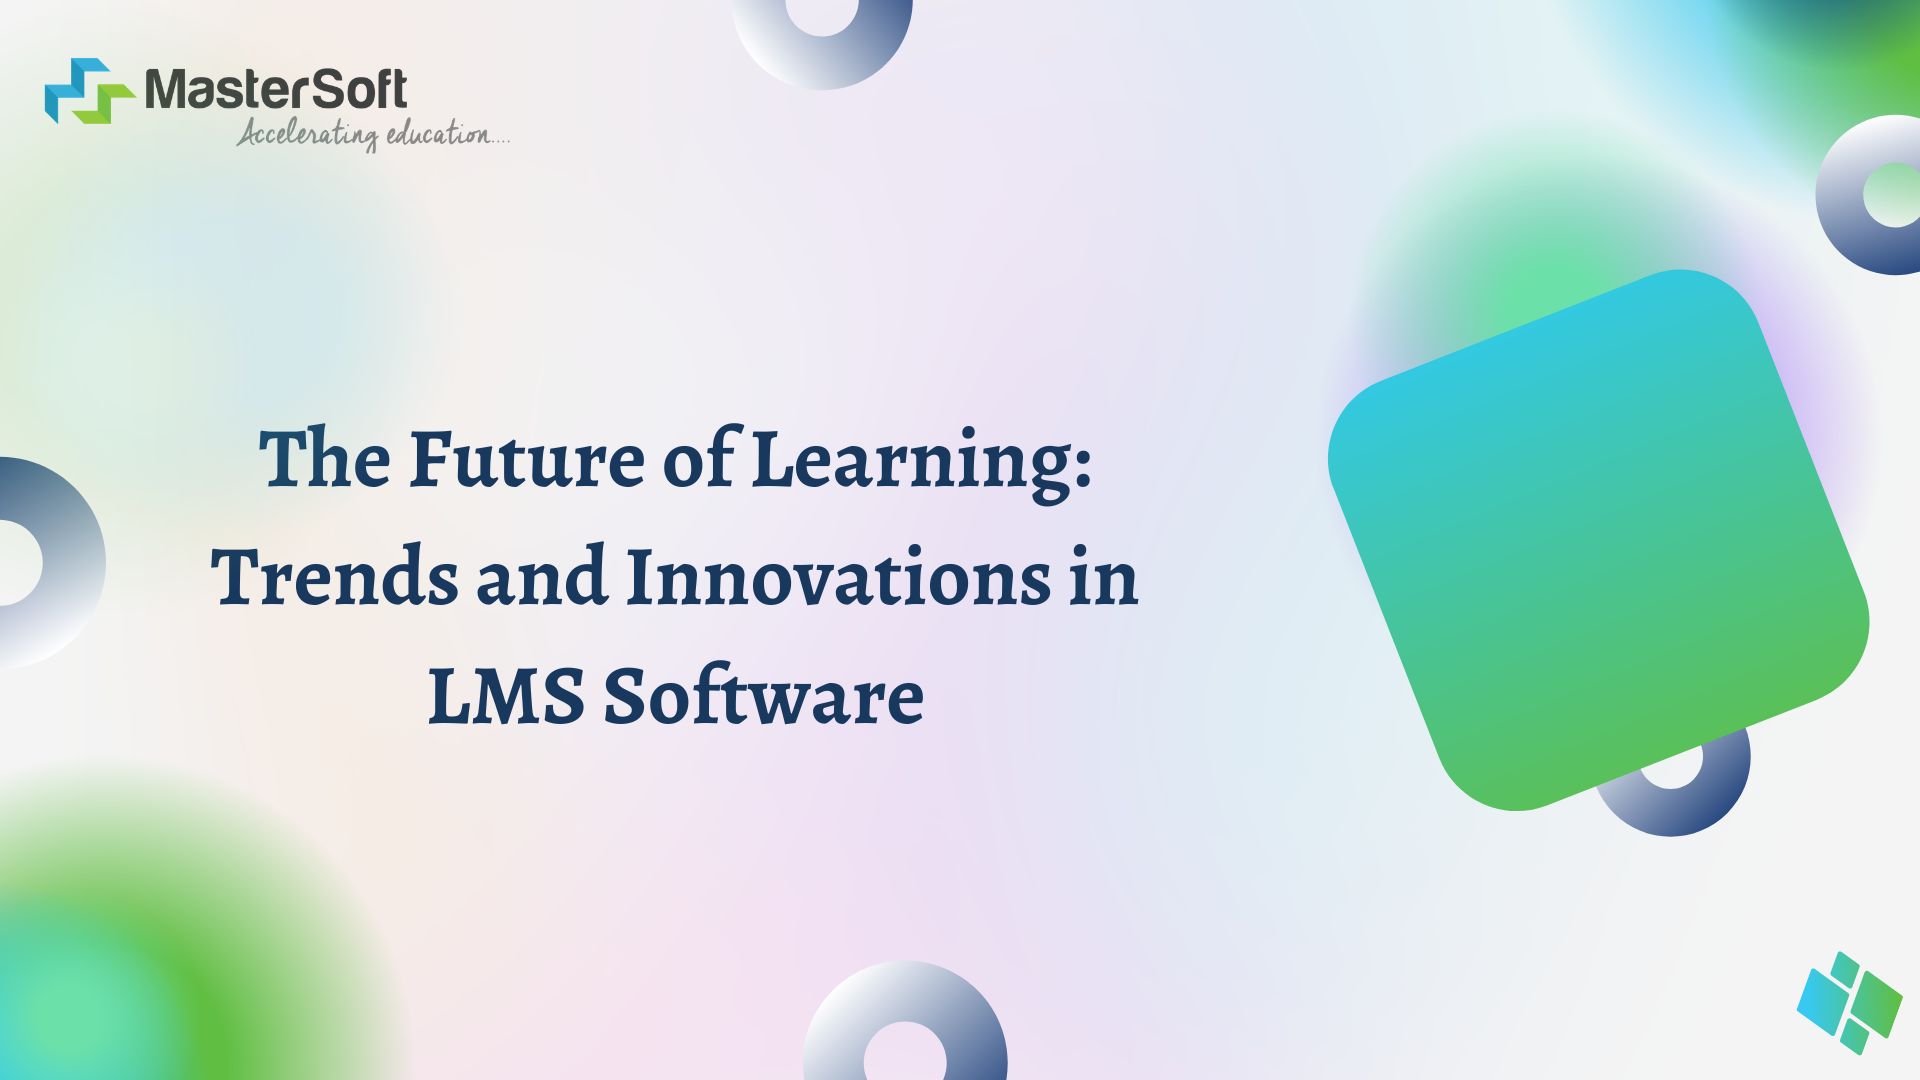 The Future of Learning: Trends and Innovations in LMS Software